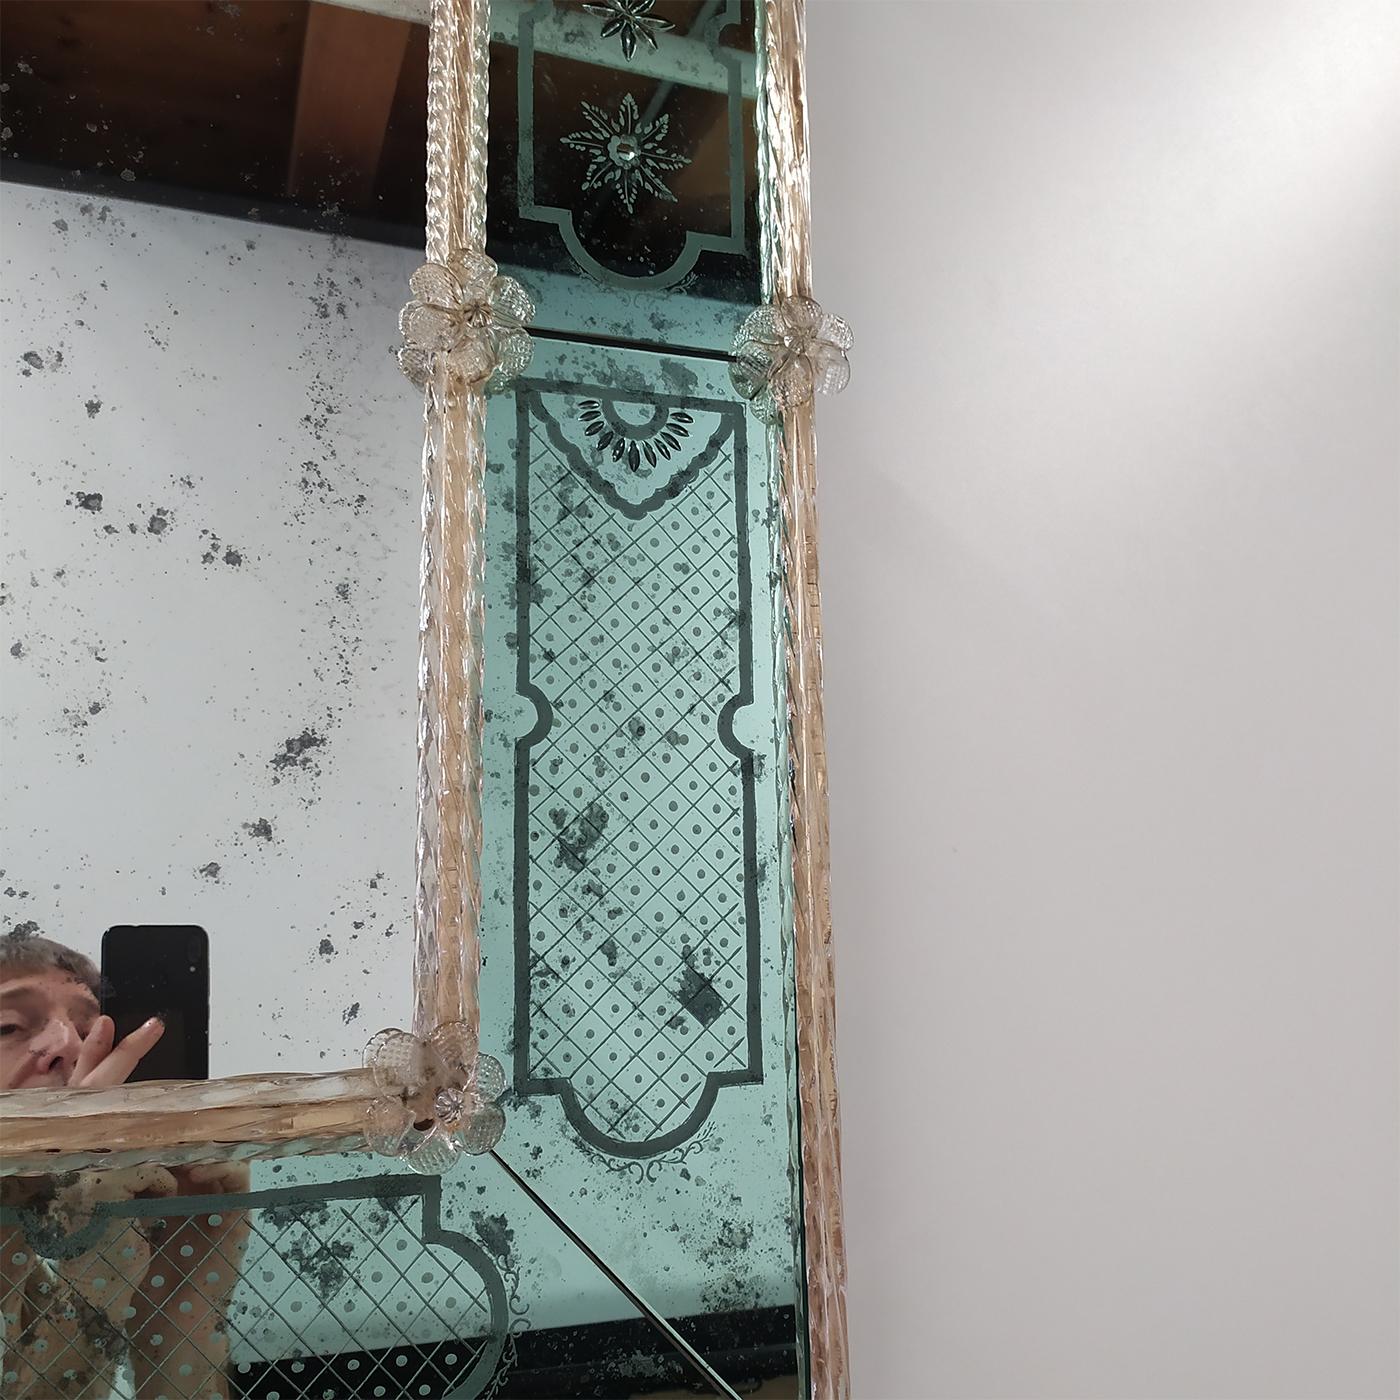 This piece of furniture is a reproduction of the typical Antique Venetian Mirror made in rectangular Murano glass, silvered with antique silvering entirely produced in mercury. This technique is typical of the 18th-century Venetian area. Both